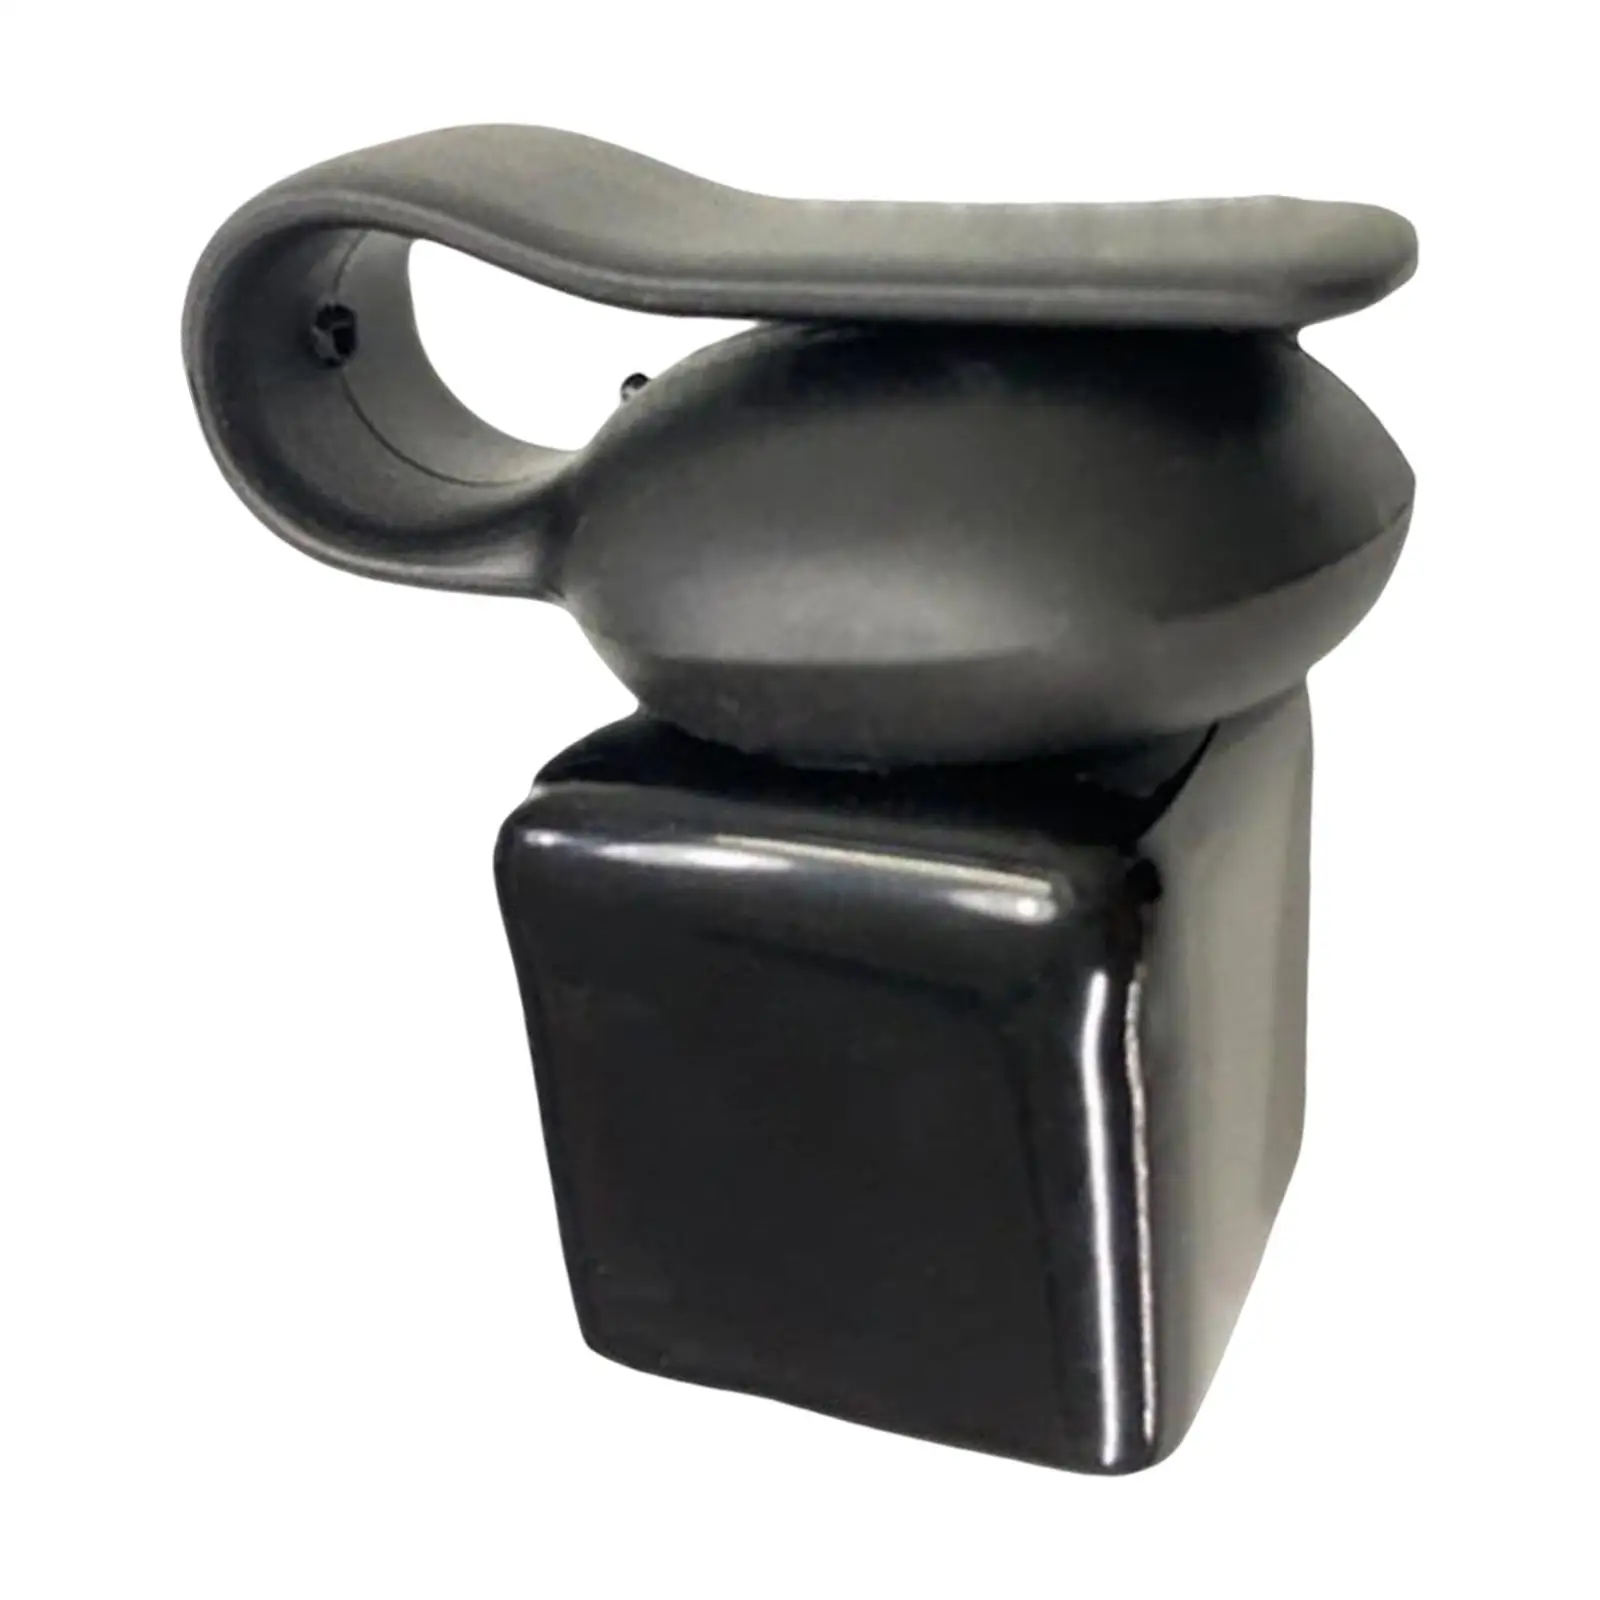 Magnetic Chalk Holder with Fixed Clip Black Pool Snooker Sports Accessories